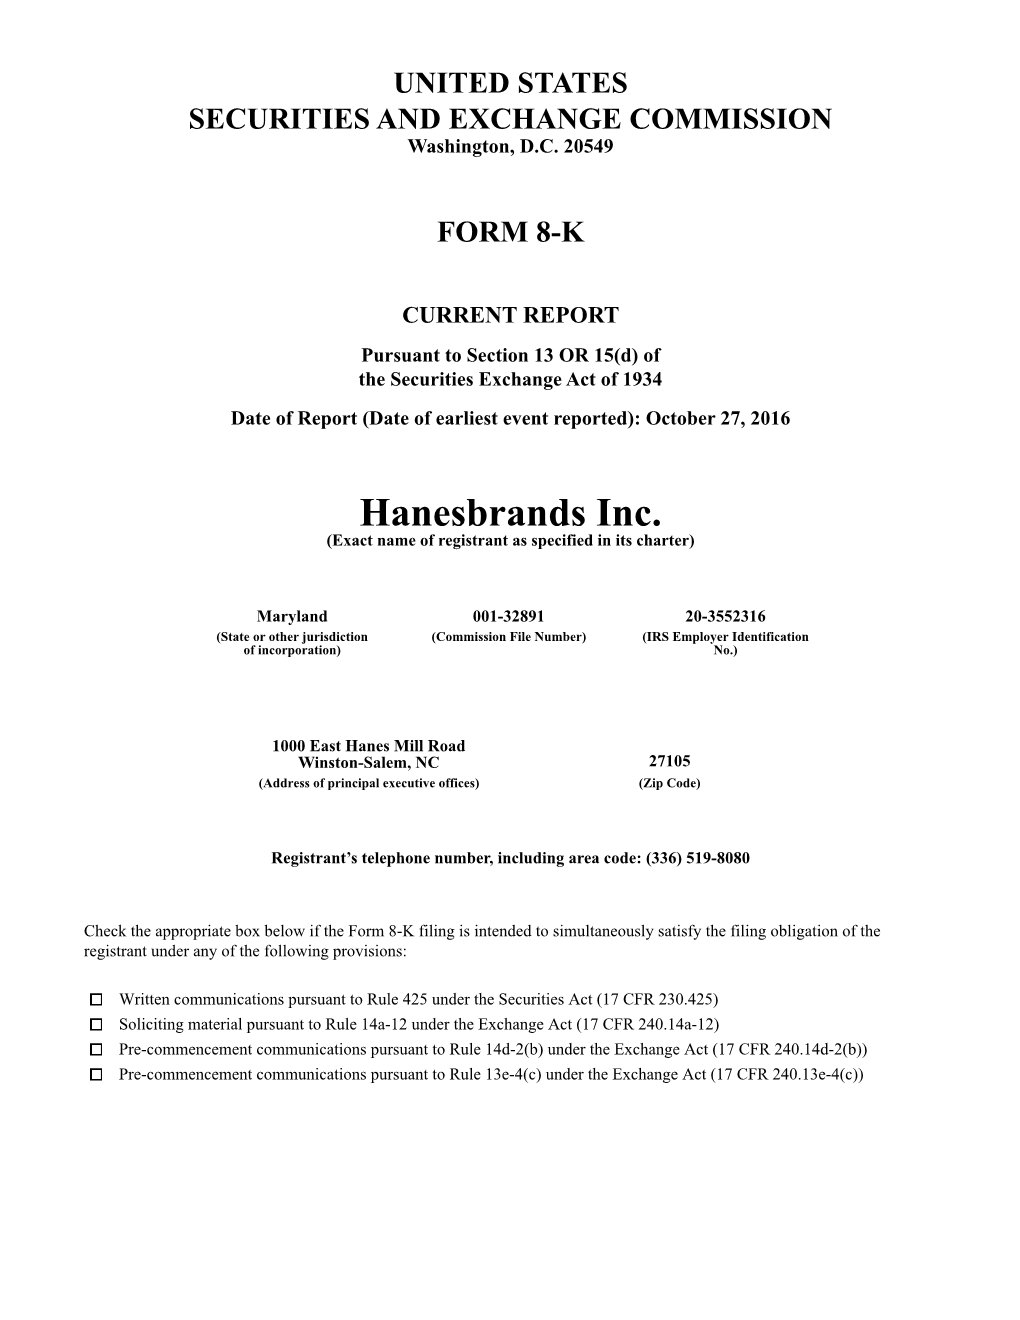 Hanesbrands Inc. (Exact Name of Registrant As Specified in Its Charter)